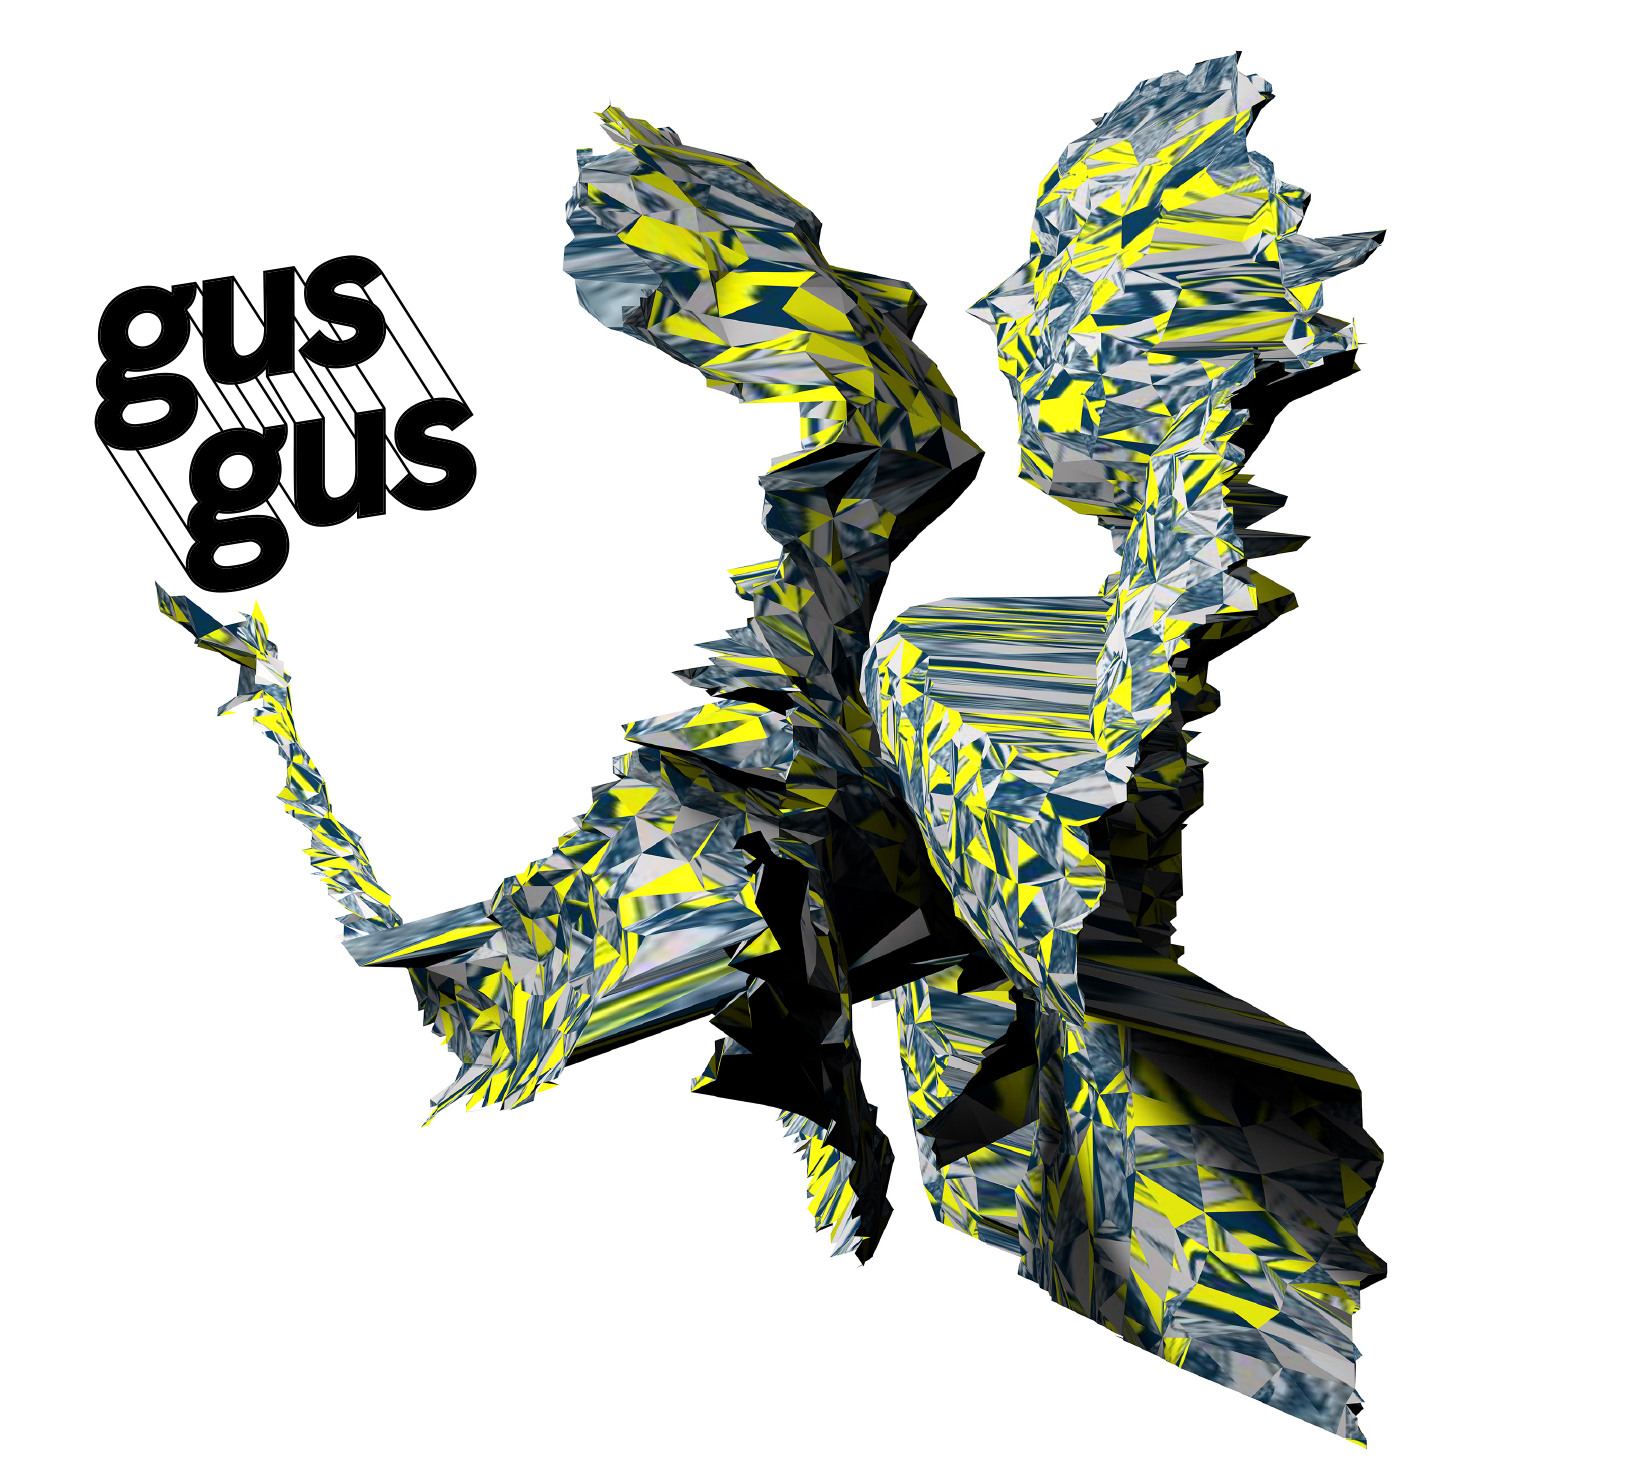 Cover image of "Crossfade" for musician GusGus